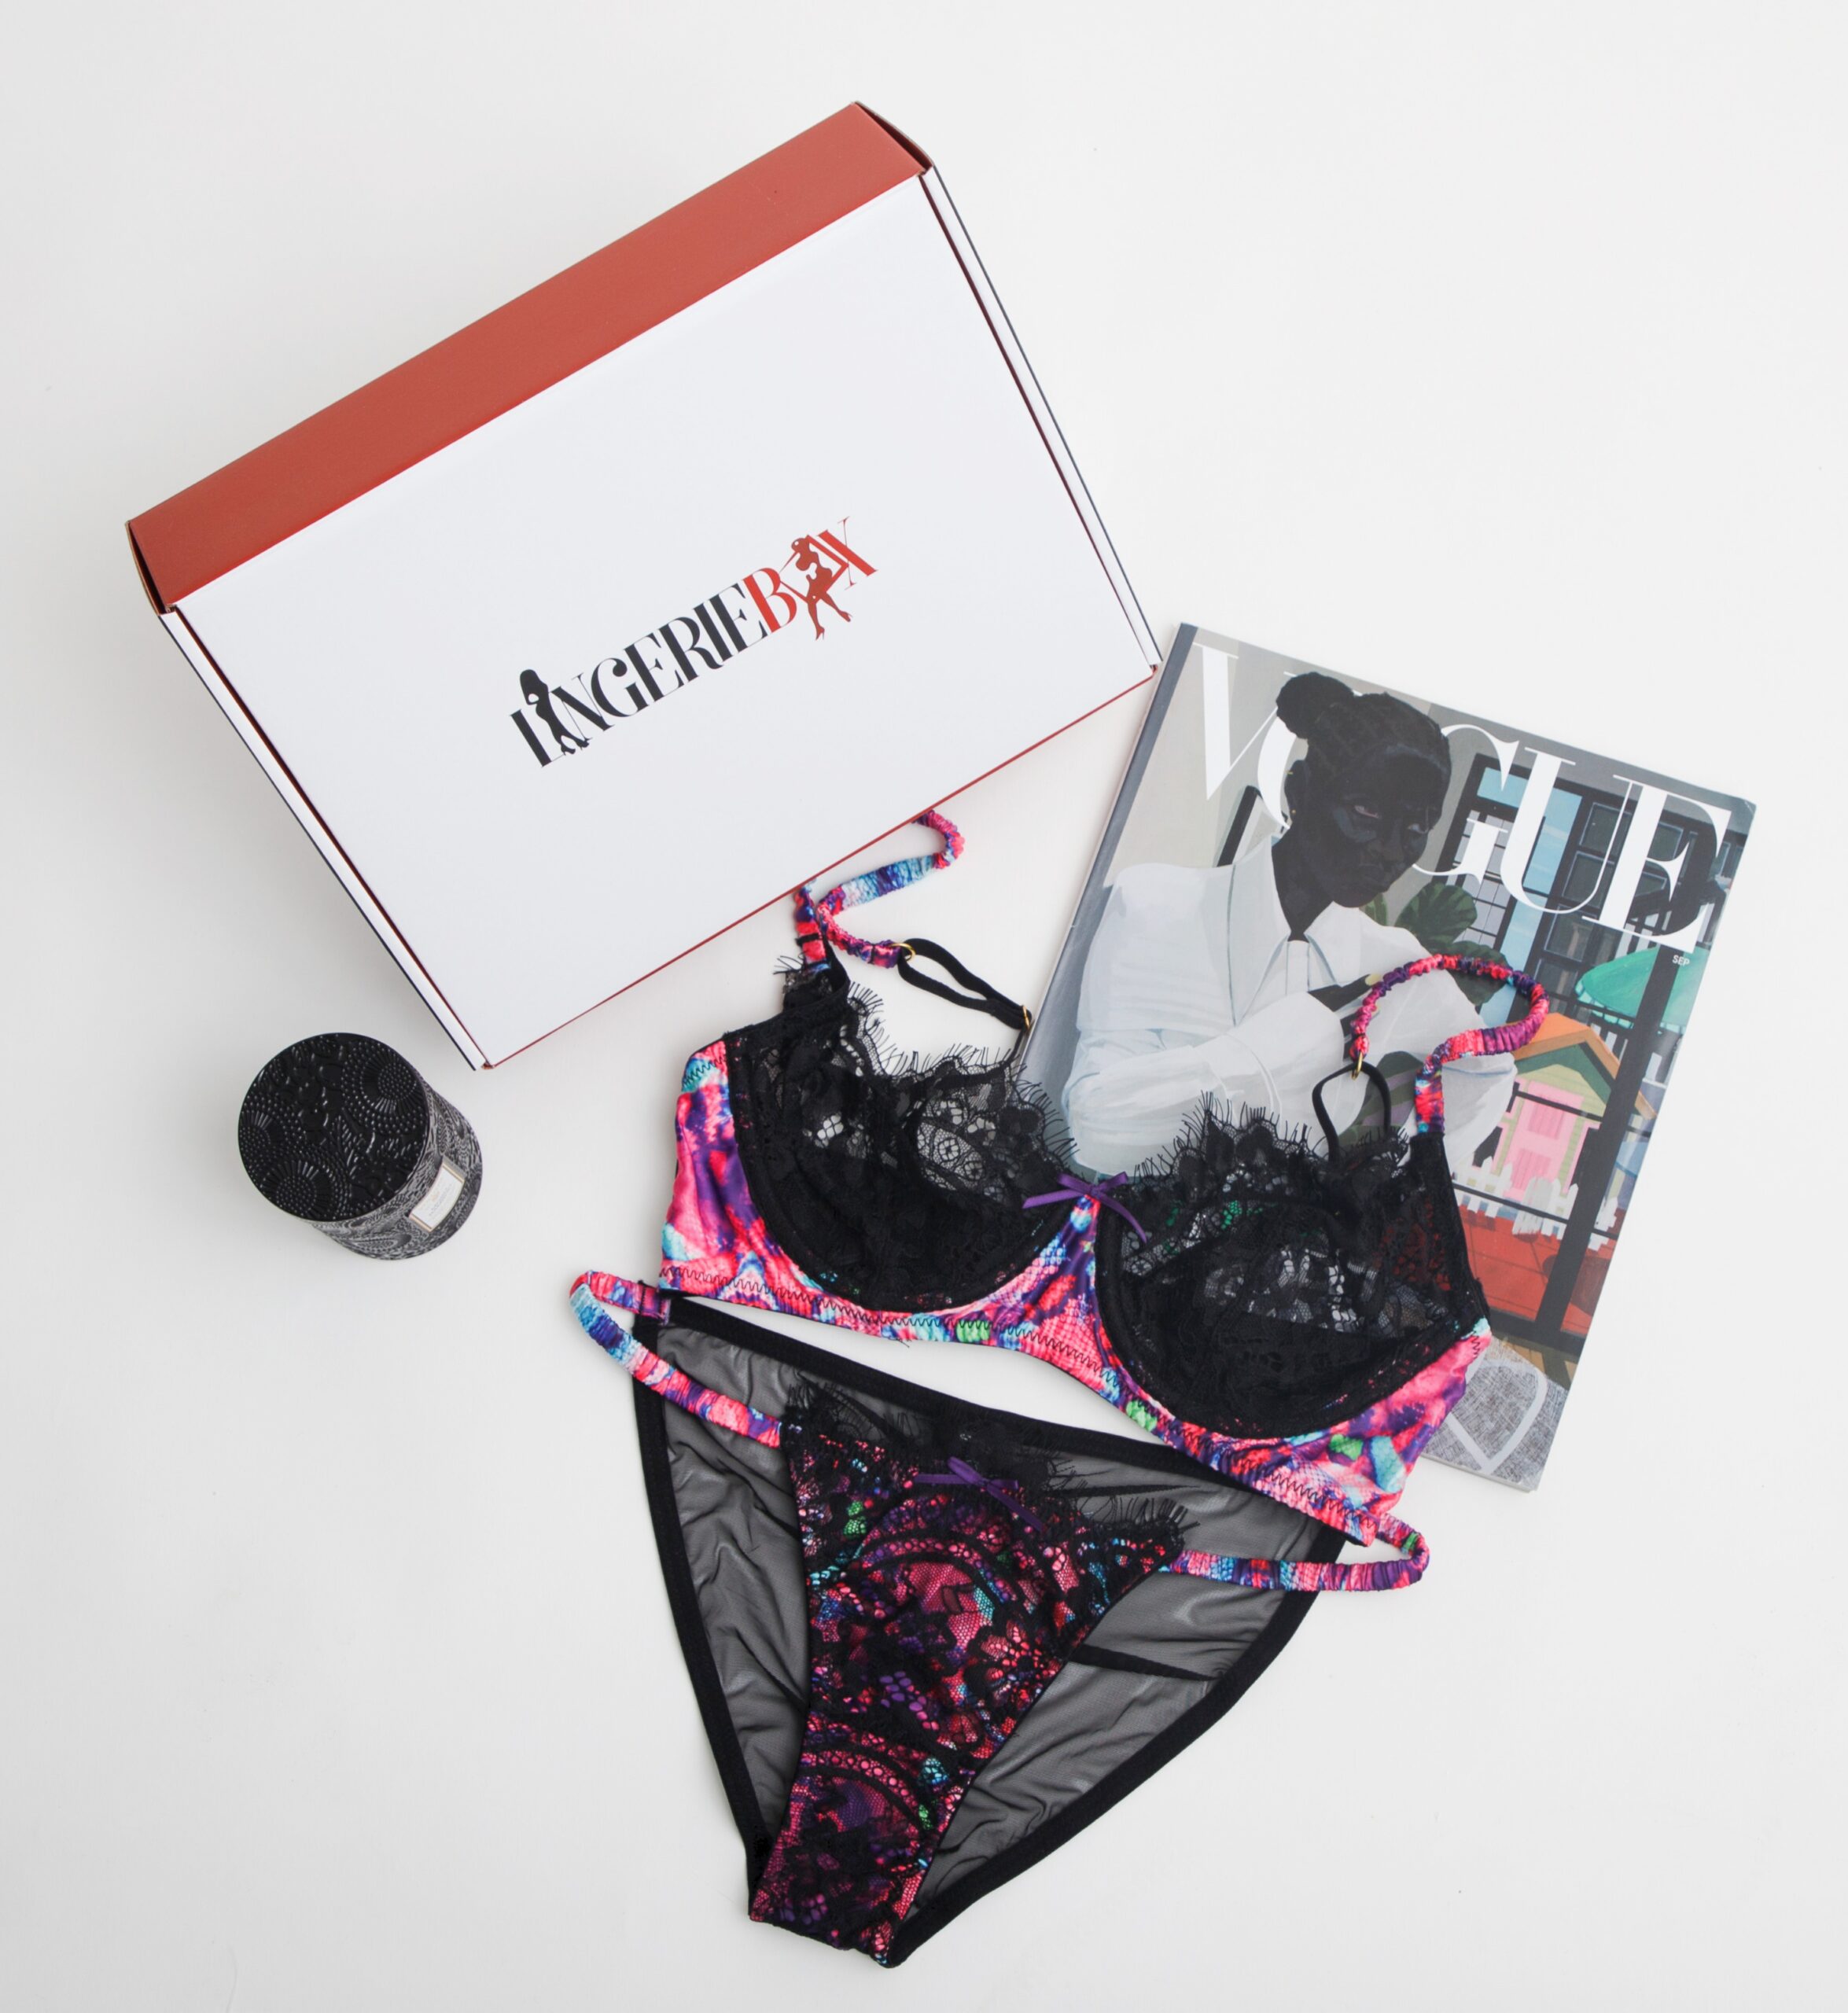 https://www.subscriptionboxes.ca/wp-content/uploads/2022/01/The-Lingerie-Box-subscription-box-scaled.jpg